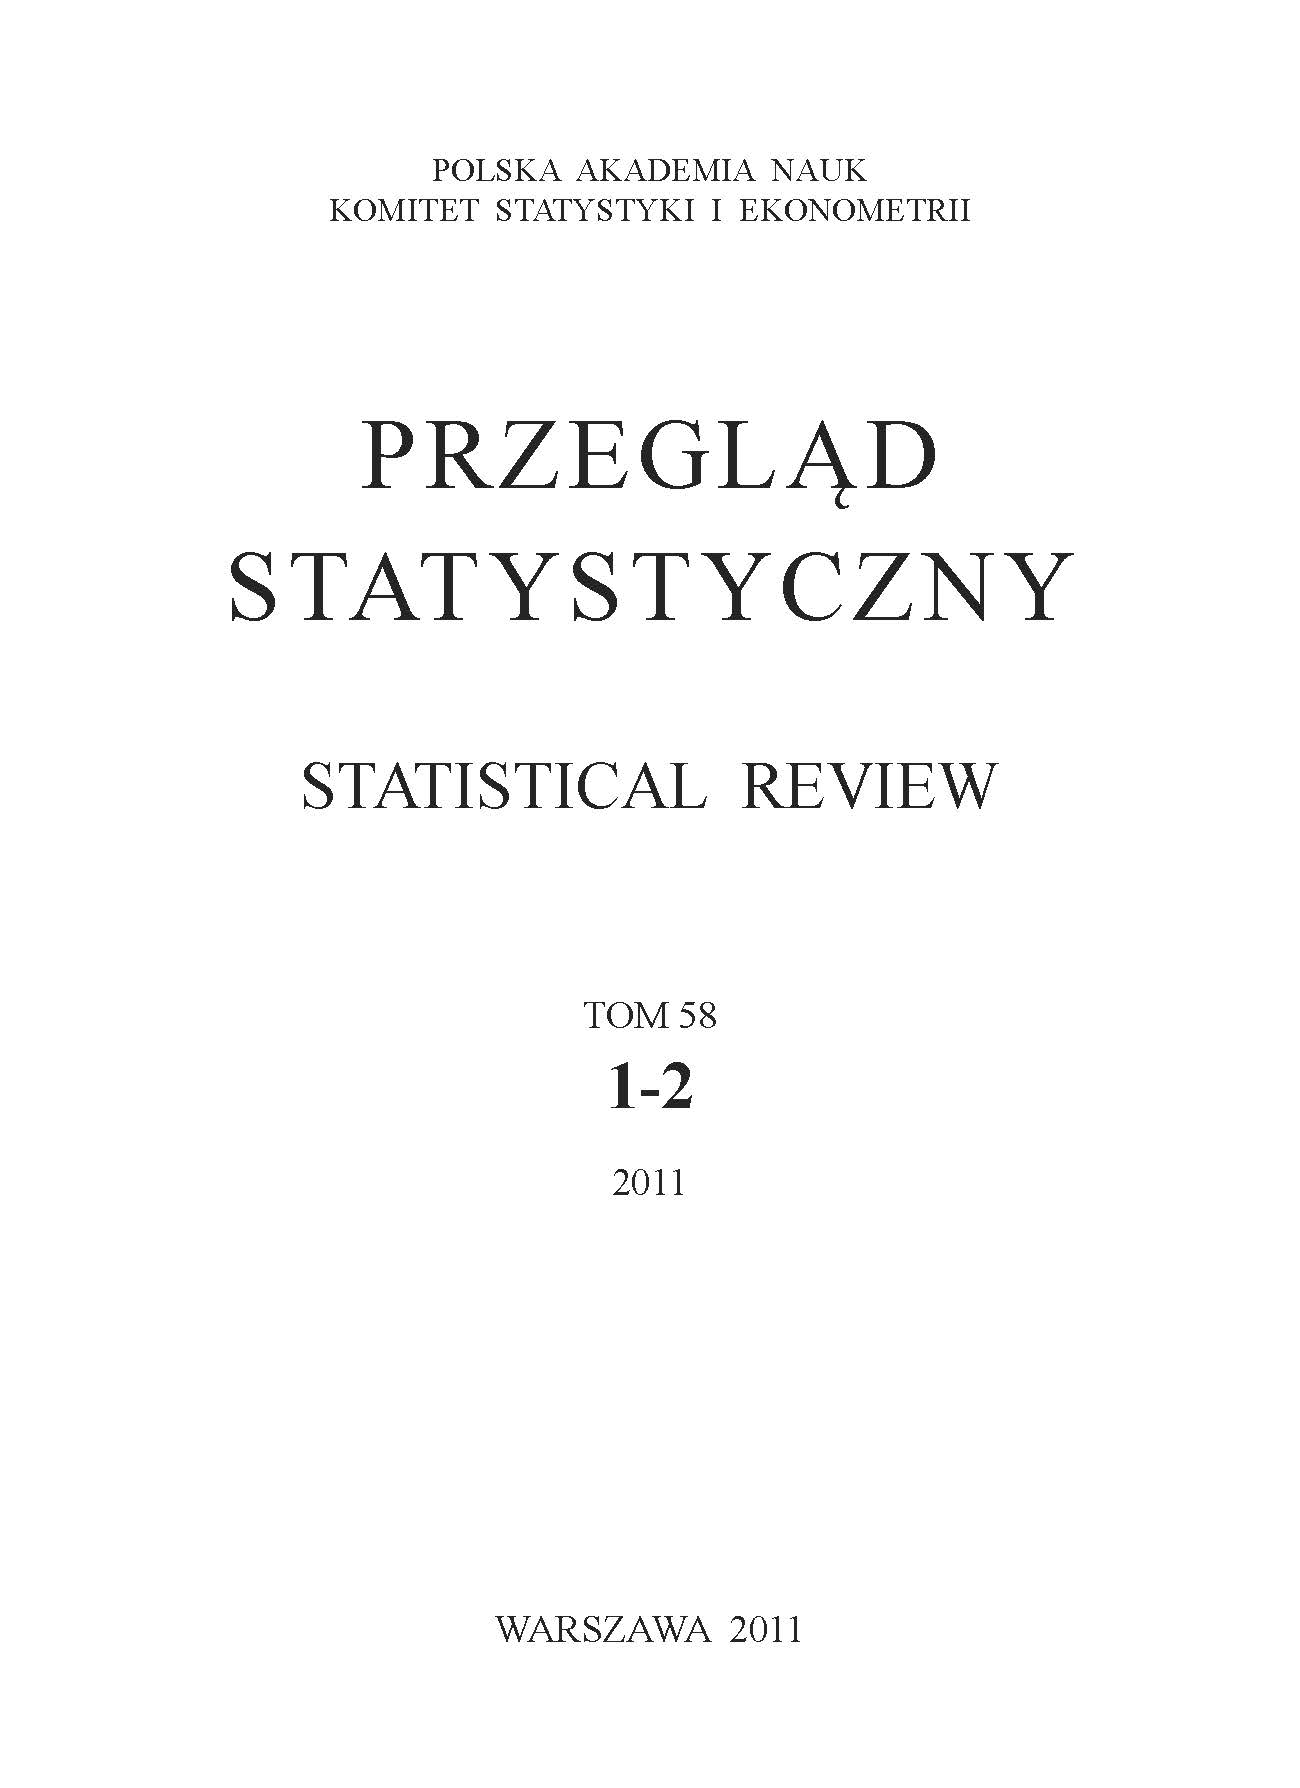 Statistical inference on changes in income polarization in Poland